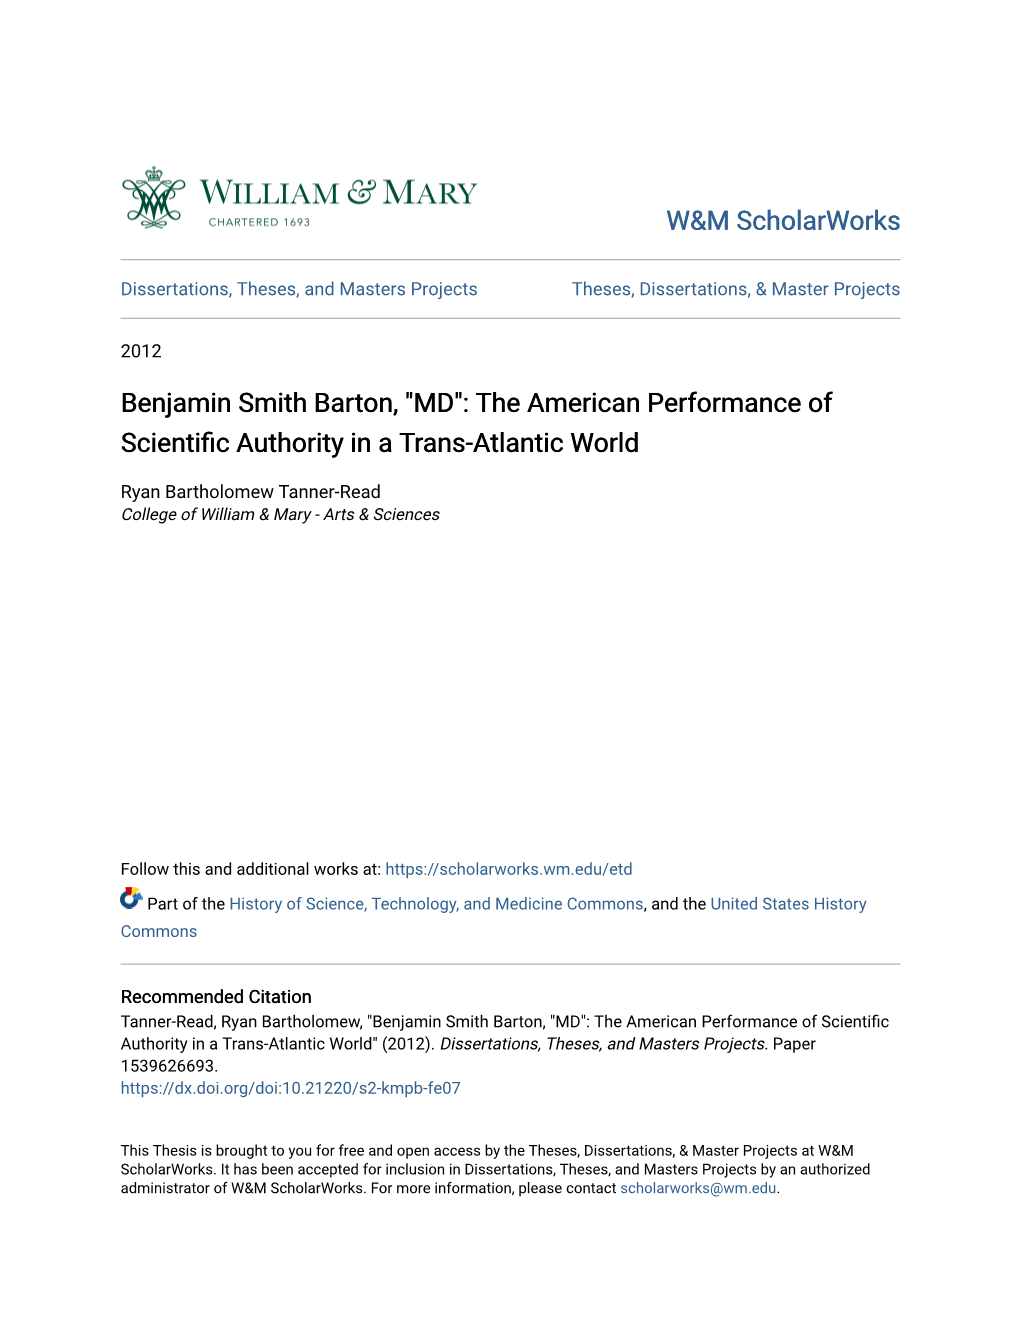 Benjamin Smith Barton, "MD": the American Performance of Scientific Authority in a Trans-Atlantic World